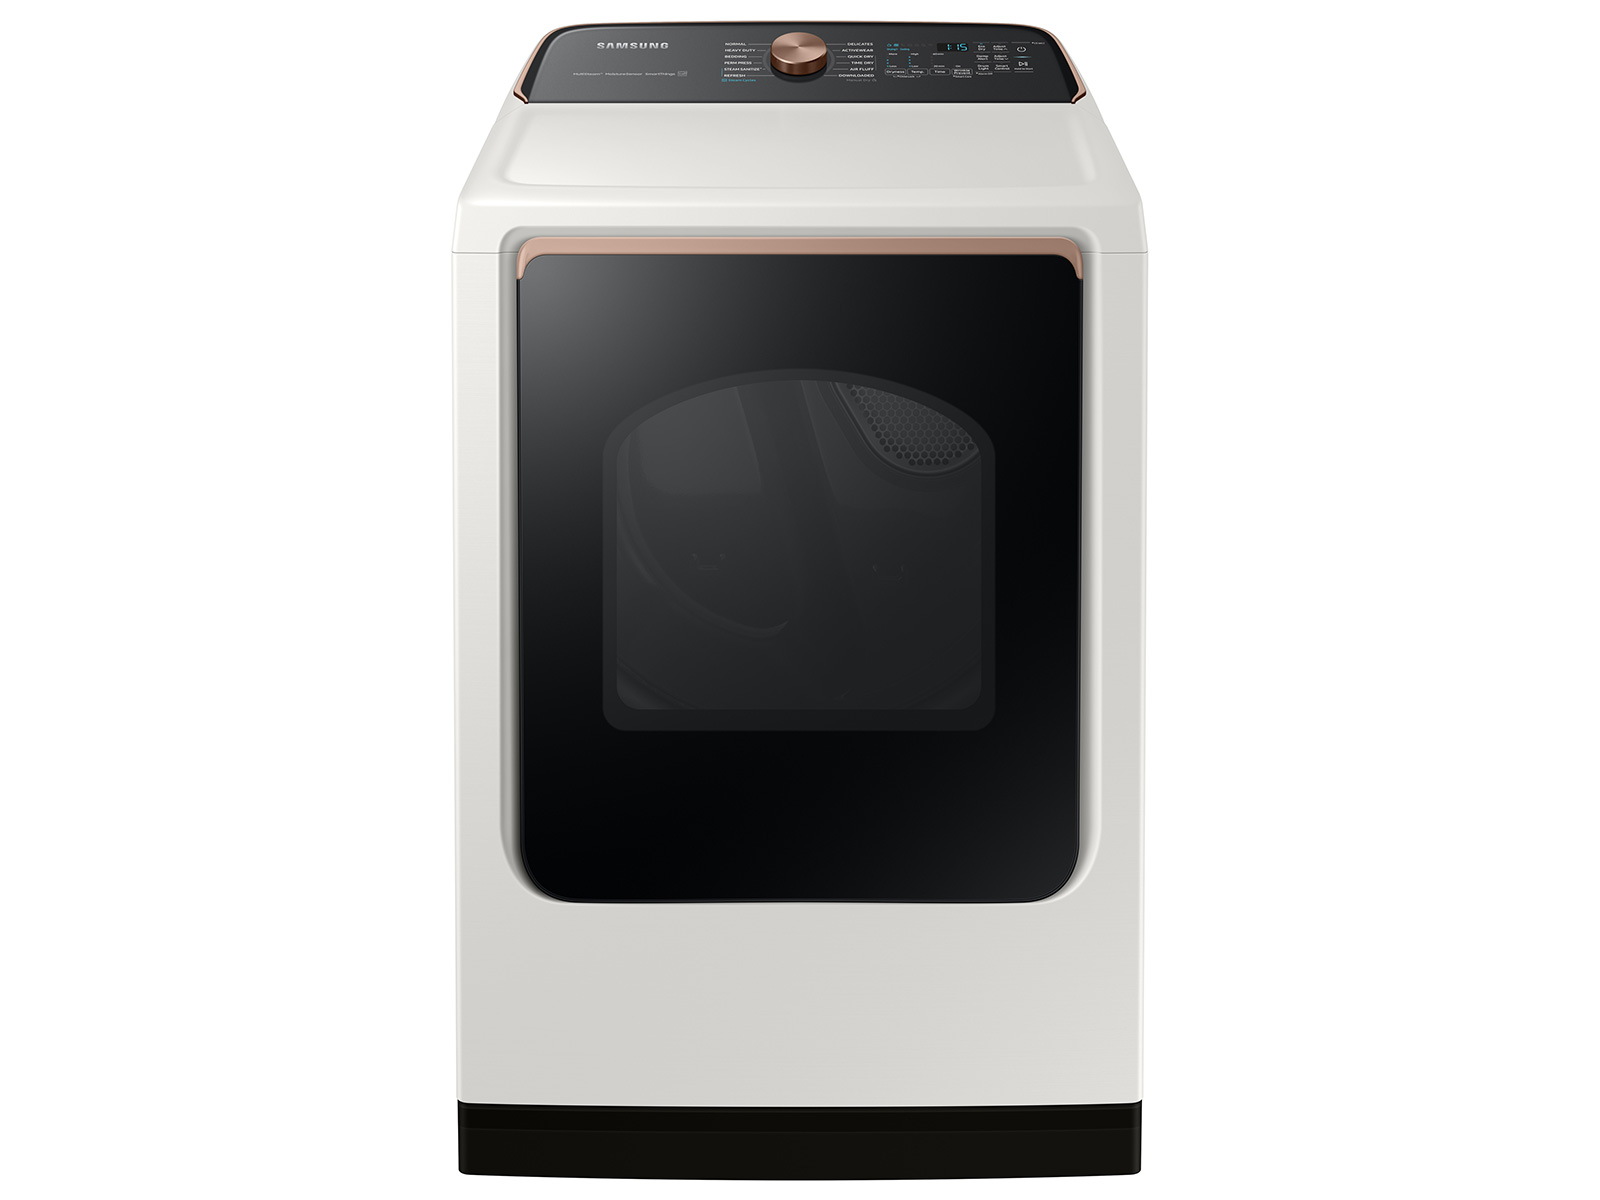 Photos - Tumble Dryer Samsung 7.4 cu. ft. Smart Electric Dryer with Steam Sanitize+ in Ivory(DVE 